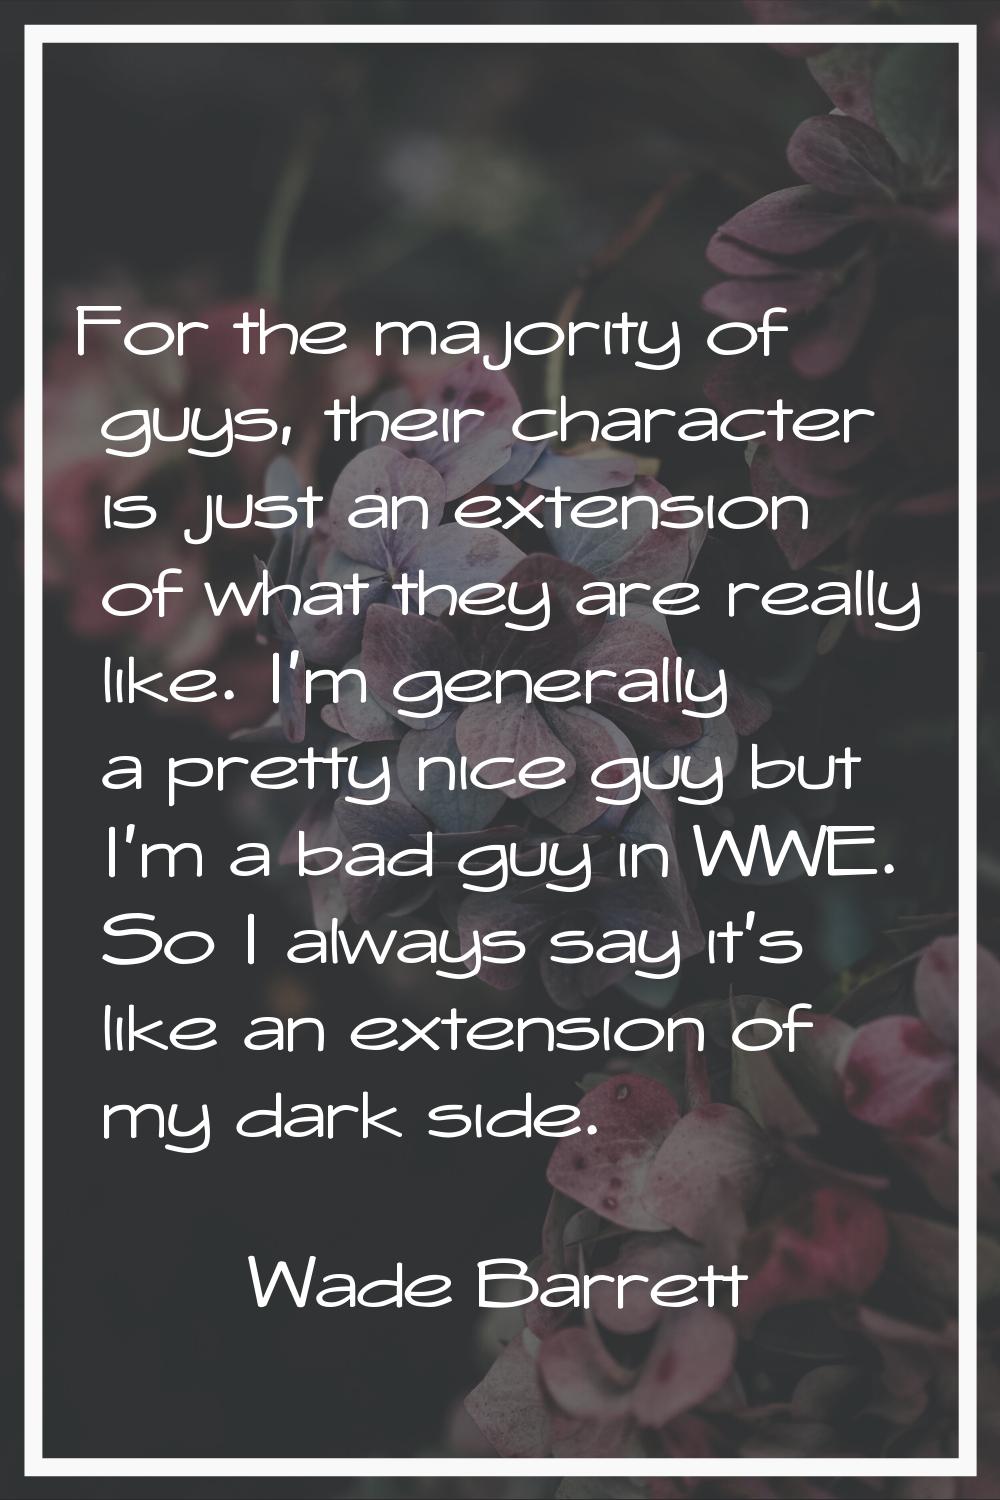 For the majority of guys, their character is just an extension of what they are really like. I'm ge